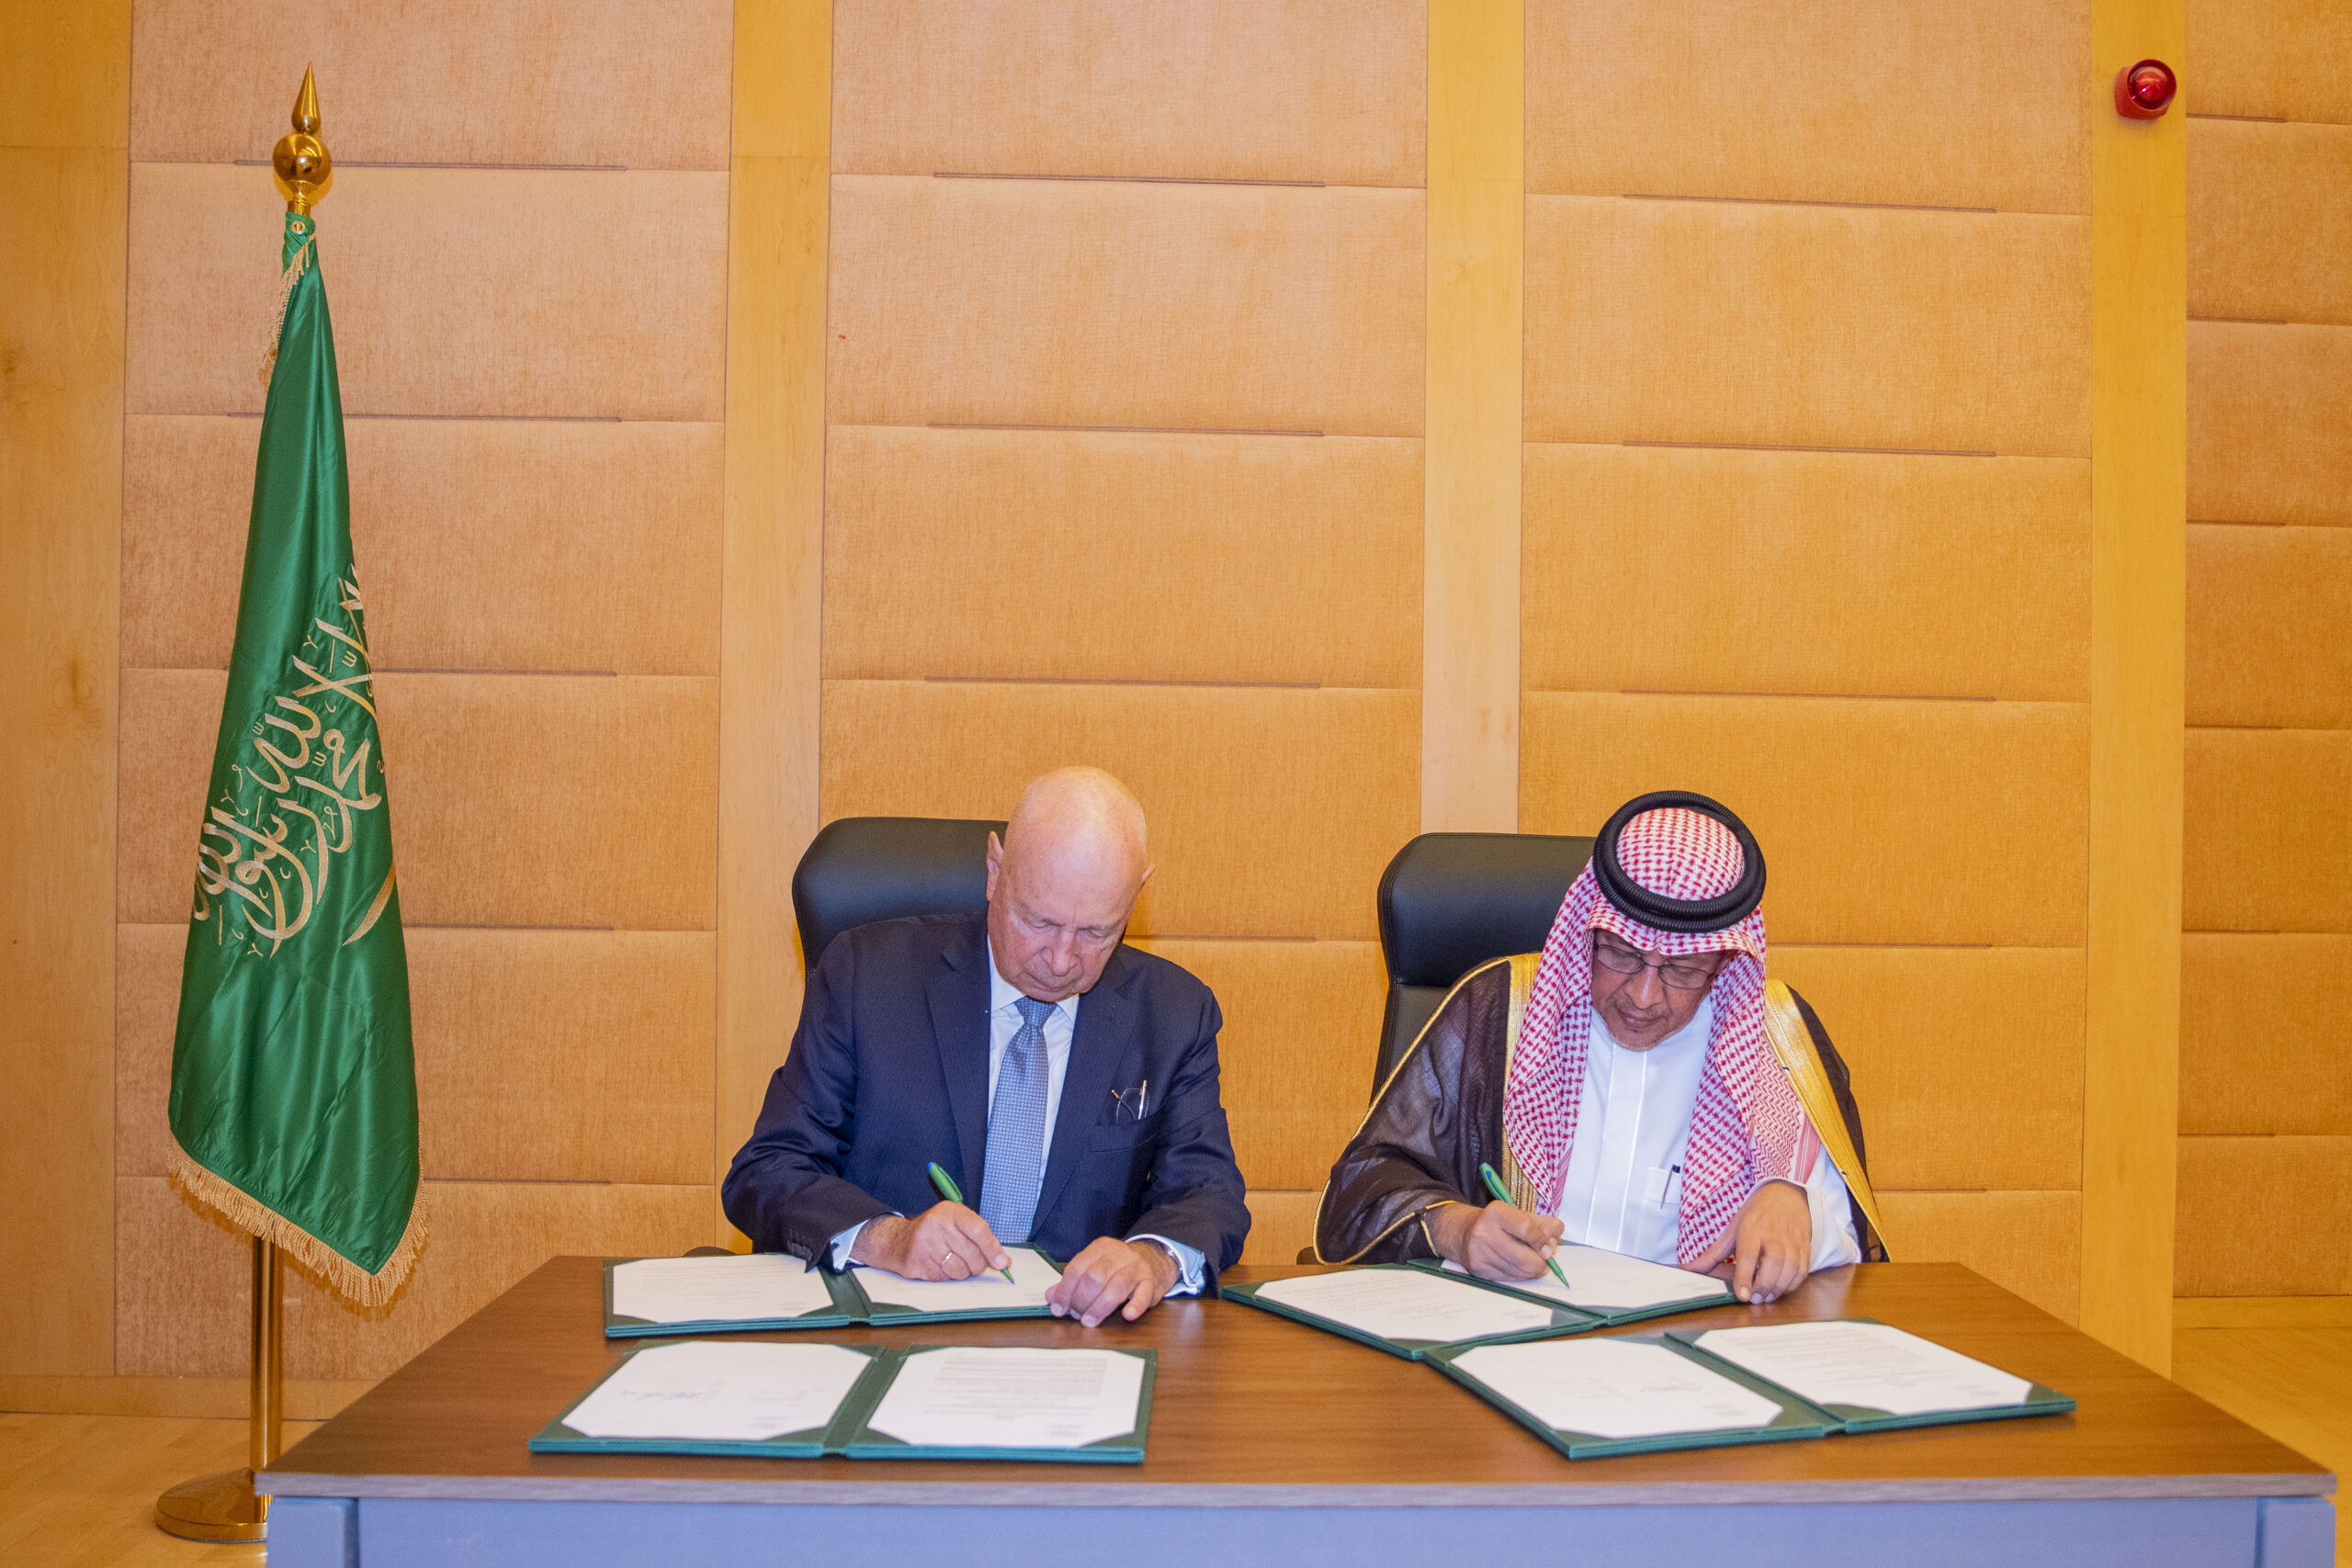 H.E. Mohammed Al-Tuwaijri, Minister of Economy and Planning, and Professor Klaus Schwab, Founder and Executive Chairman of WEF sign agreement in Riyadh Nov 6, 2019